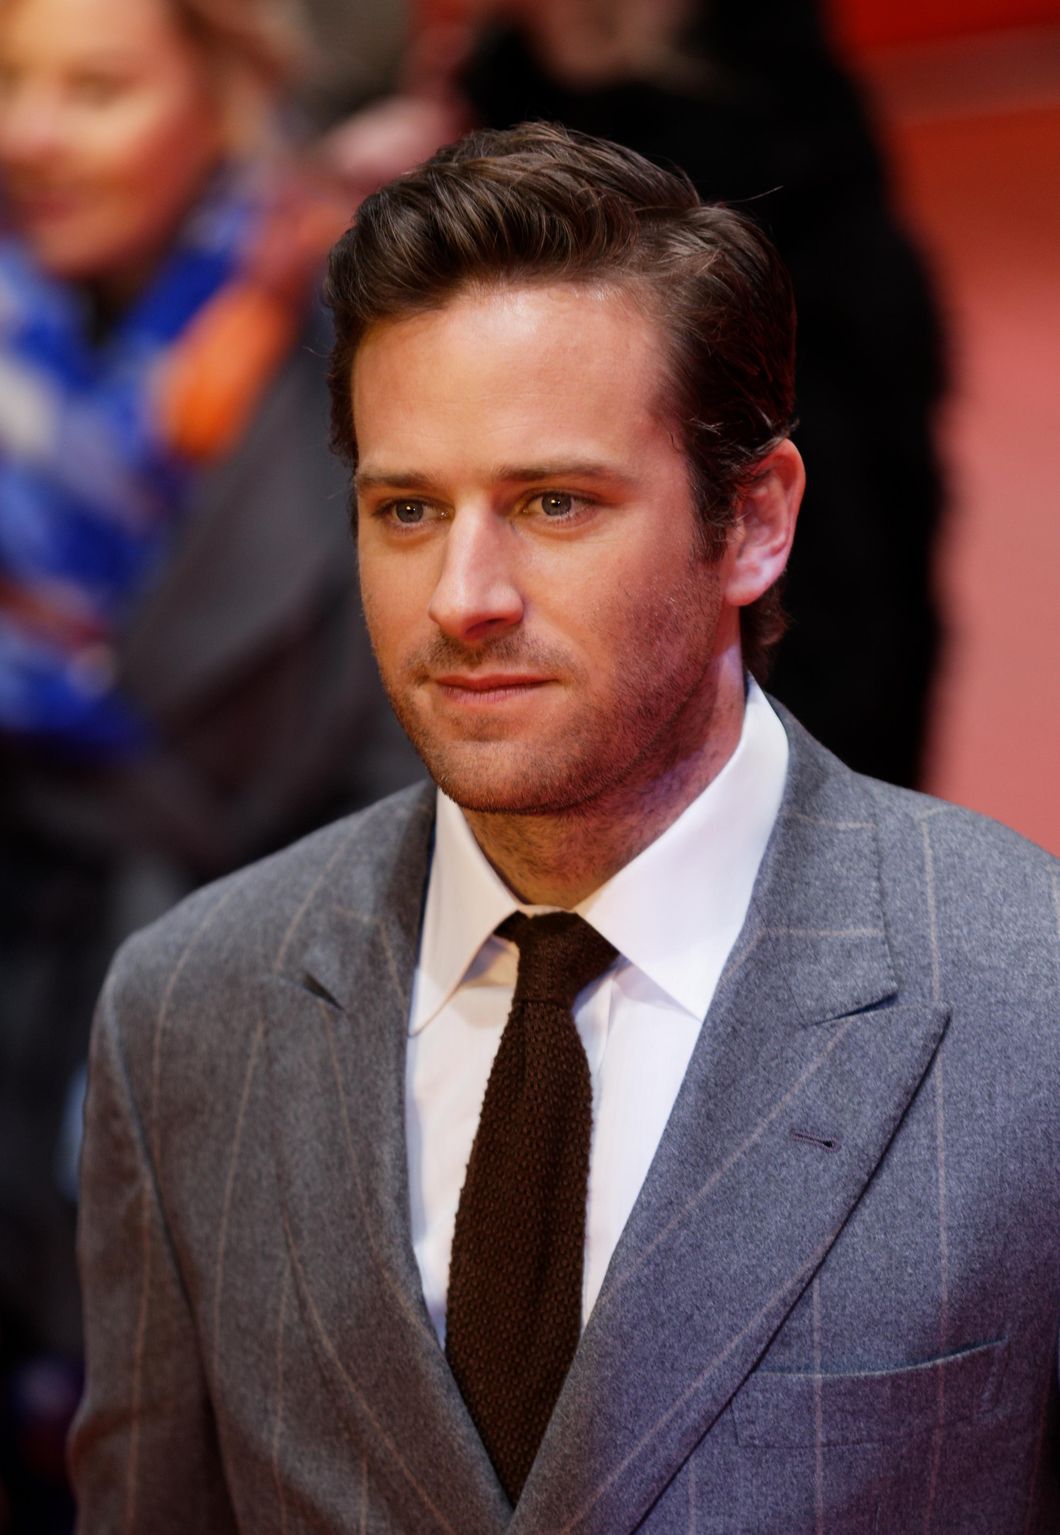 Everything You Need To Know About What's Going Down With Armie Hammer